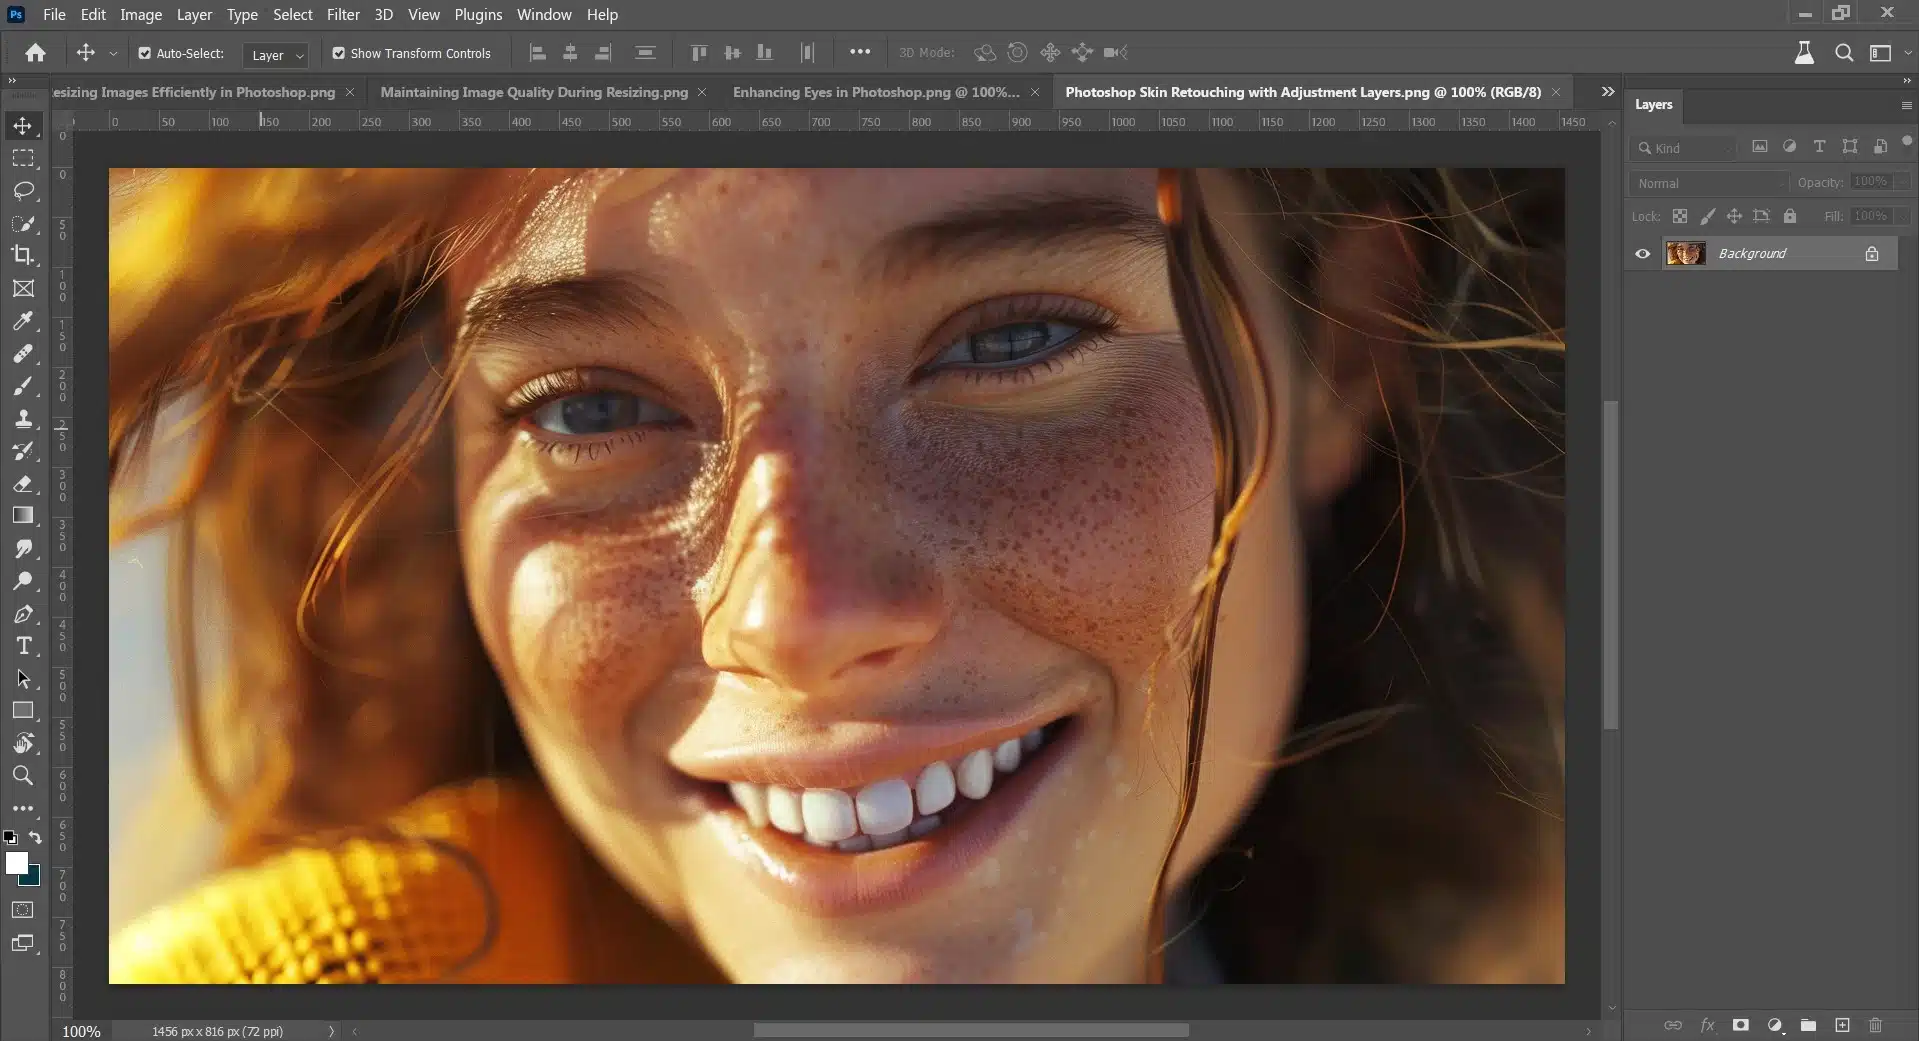 Close-up of a smiling woman's face with visible freckles being retouched in Photoshop.